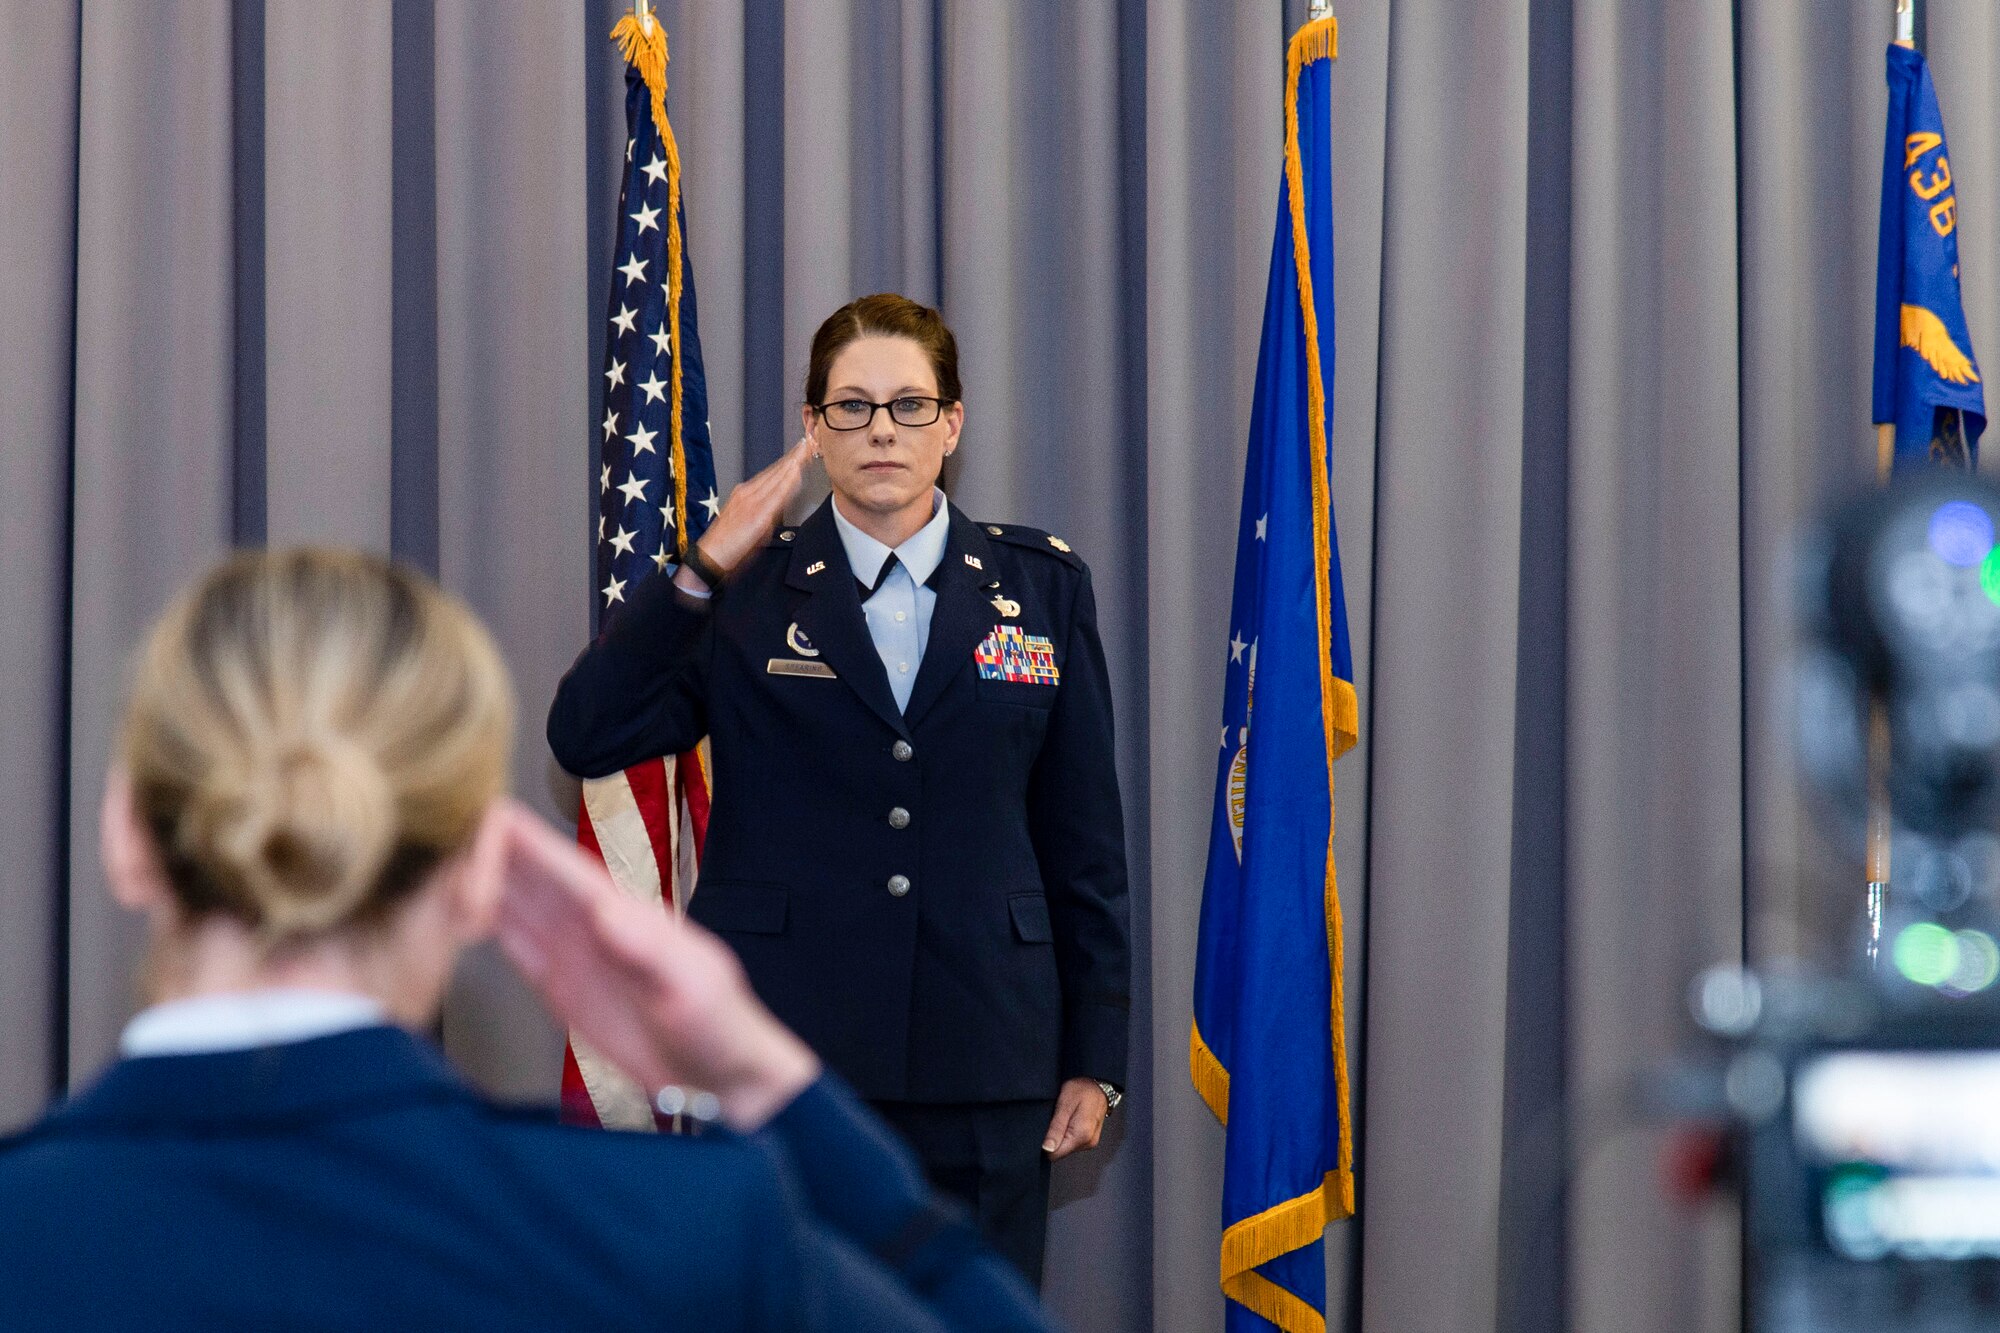 Lt. Col. Sara Spearing, center, 436th Health Care Operations Squadron commander, receives her first salute from Lt. Col. Kathleen Drum, left, 436th HCOS medical services flight commander, during a change of command ceremony held at The Landings on Dover Air Force Base, Delaware, June 9, 2022. The 436th HCOS Change of Command was the second of four ceremonies conducted within the 436th MDG. (U.S. Air Force photo by Roland Balik)